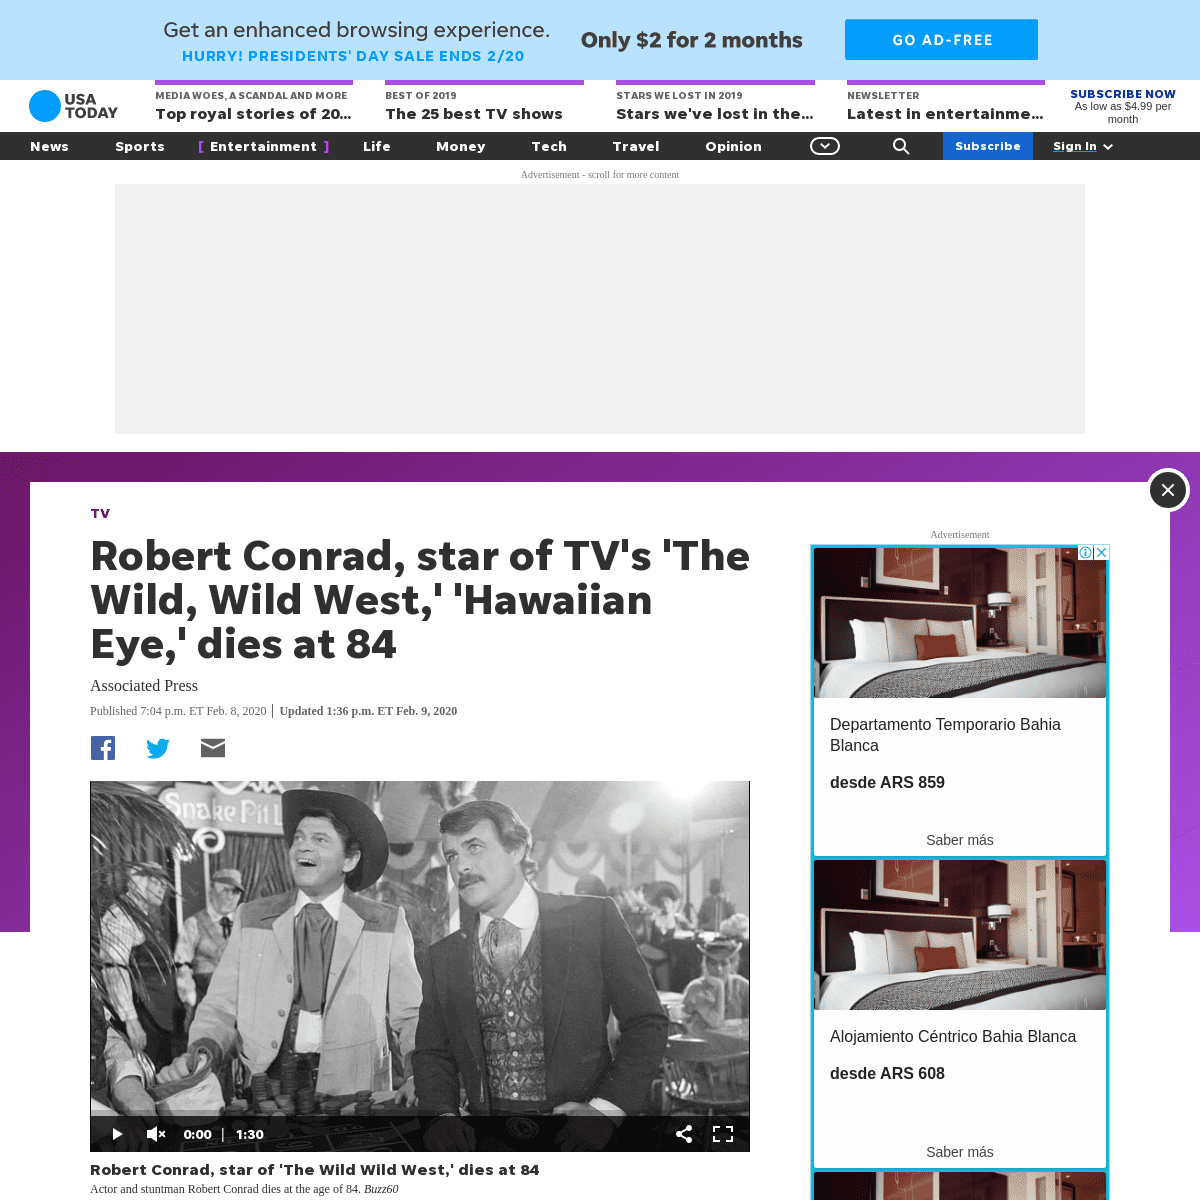 A complete backup of www.usatoday.com/story/entertainment/tv/2020/02/08/robert-conrad-dies-84-actor-starred-tvs-the-wild-wild-we